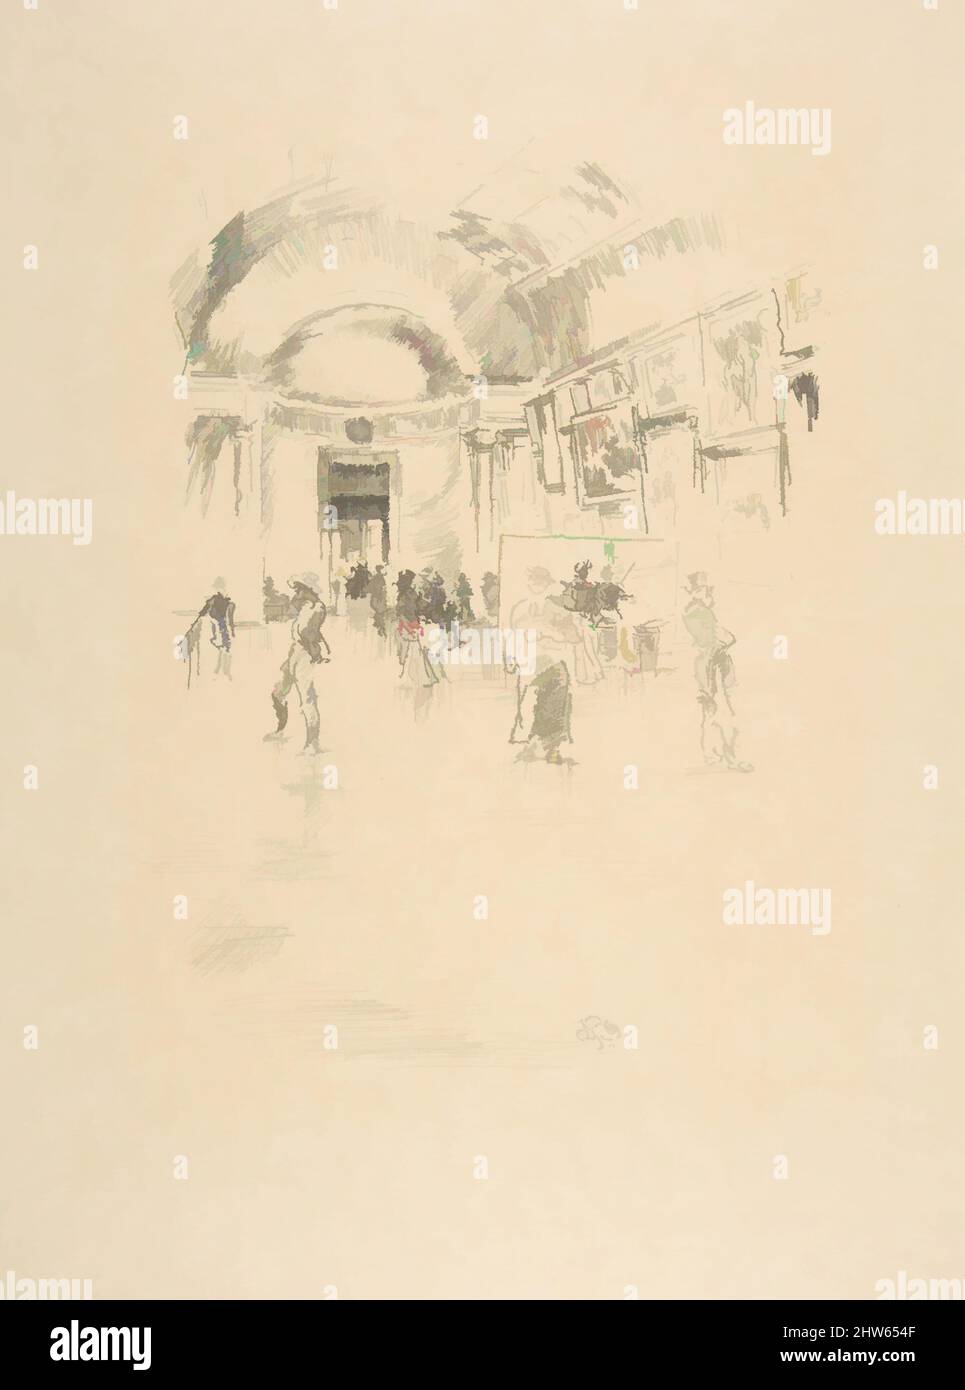 Art inspired by The Long Gallery, Louvre, 1894, Transfer lithograph with stumping, drawn on fine-grained transfer paper; only state (Chicago); printed in black ink on ivory wove paper, Image: 8 1/2 × 6 1/4 in. (21.6 × 15.9 cm), Prints, James McNeill Whistler (American, Lowell, Classic works modernized by Artotop with a splash of modernity. Shapes, color and value, eye-catching visual impact on art. Emotions through freedom of artworks in a contemporary way. A timeless message pursuing a wildly creative new direction. Artists turning to the digital medium and creating the Artotop NFT Stock Photo